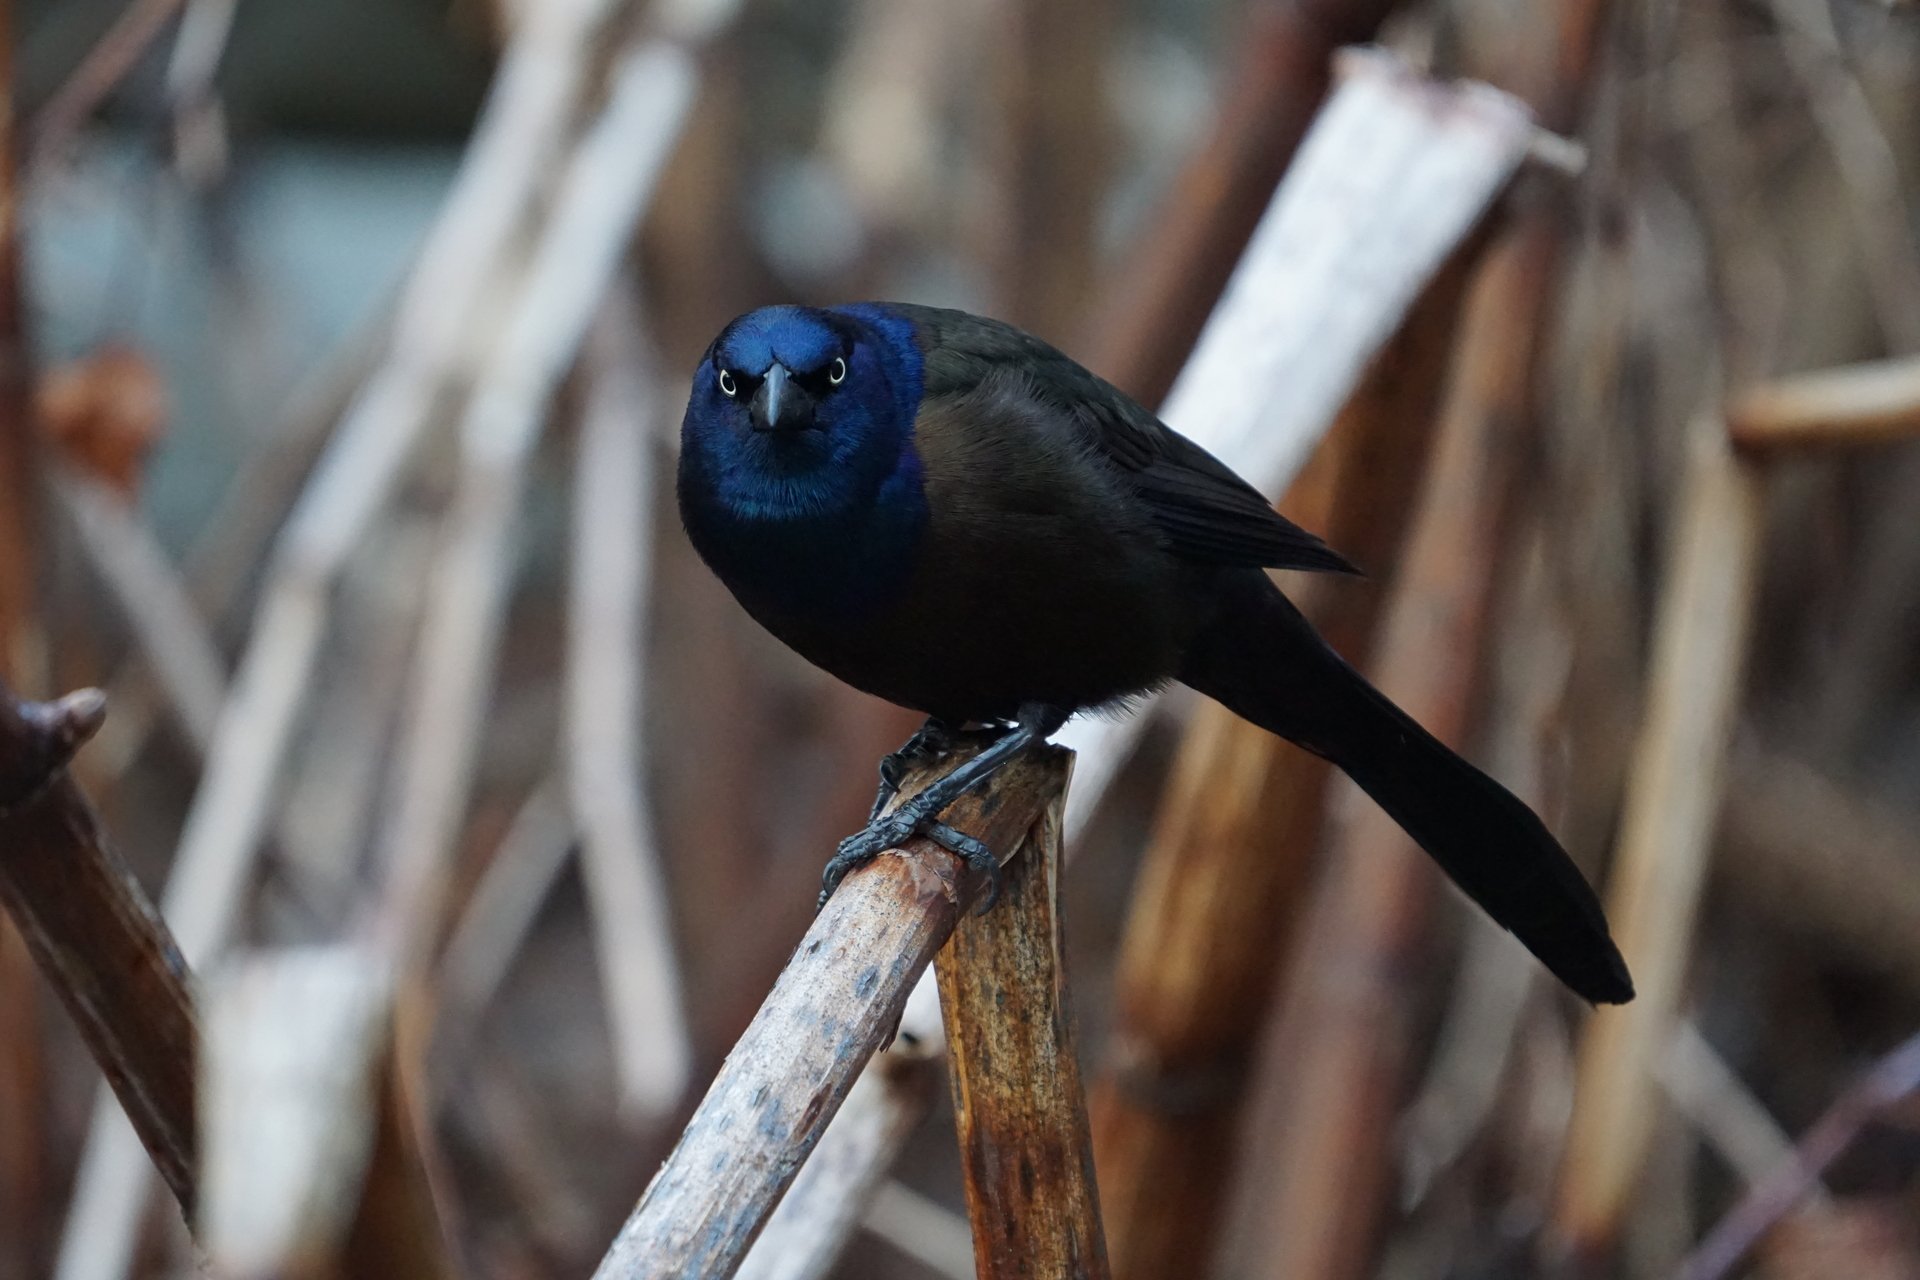 Common Grackle perched on reed